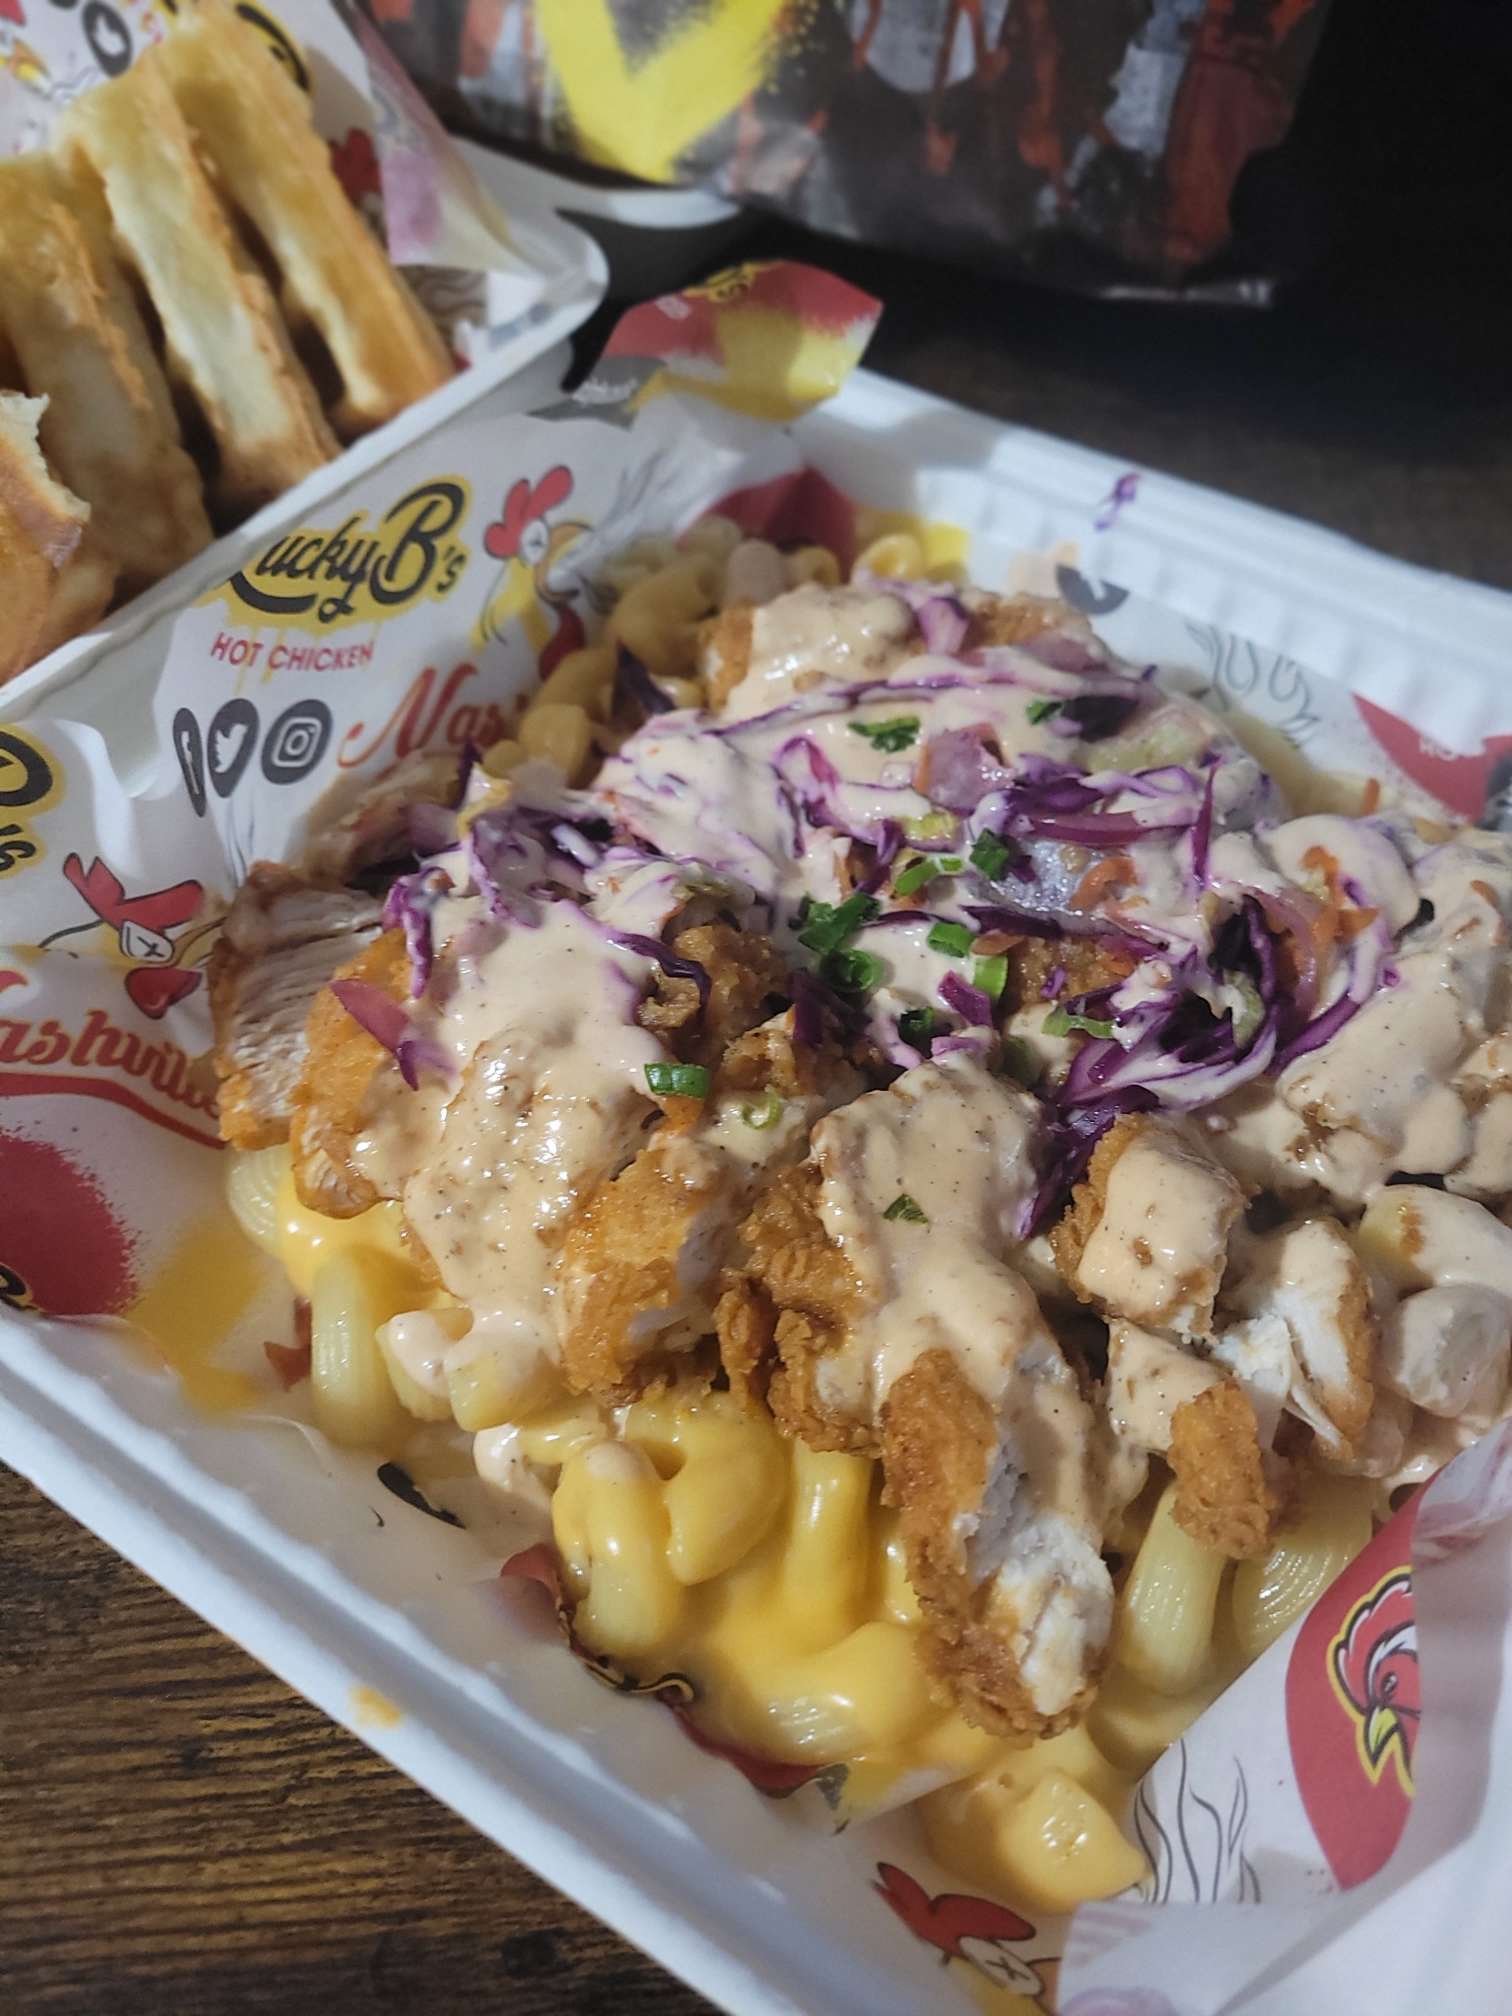 lucky b's loaded mac and cheese